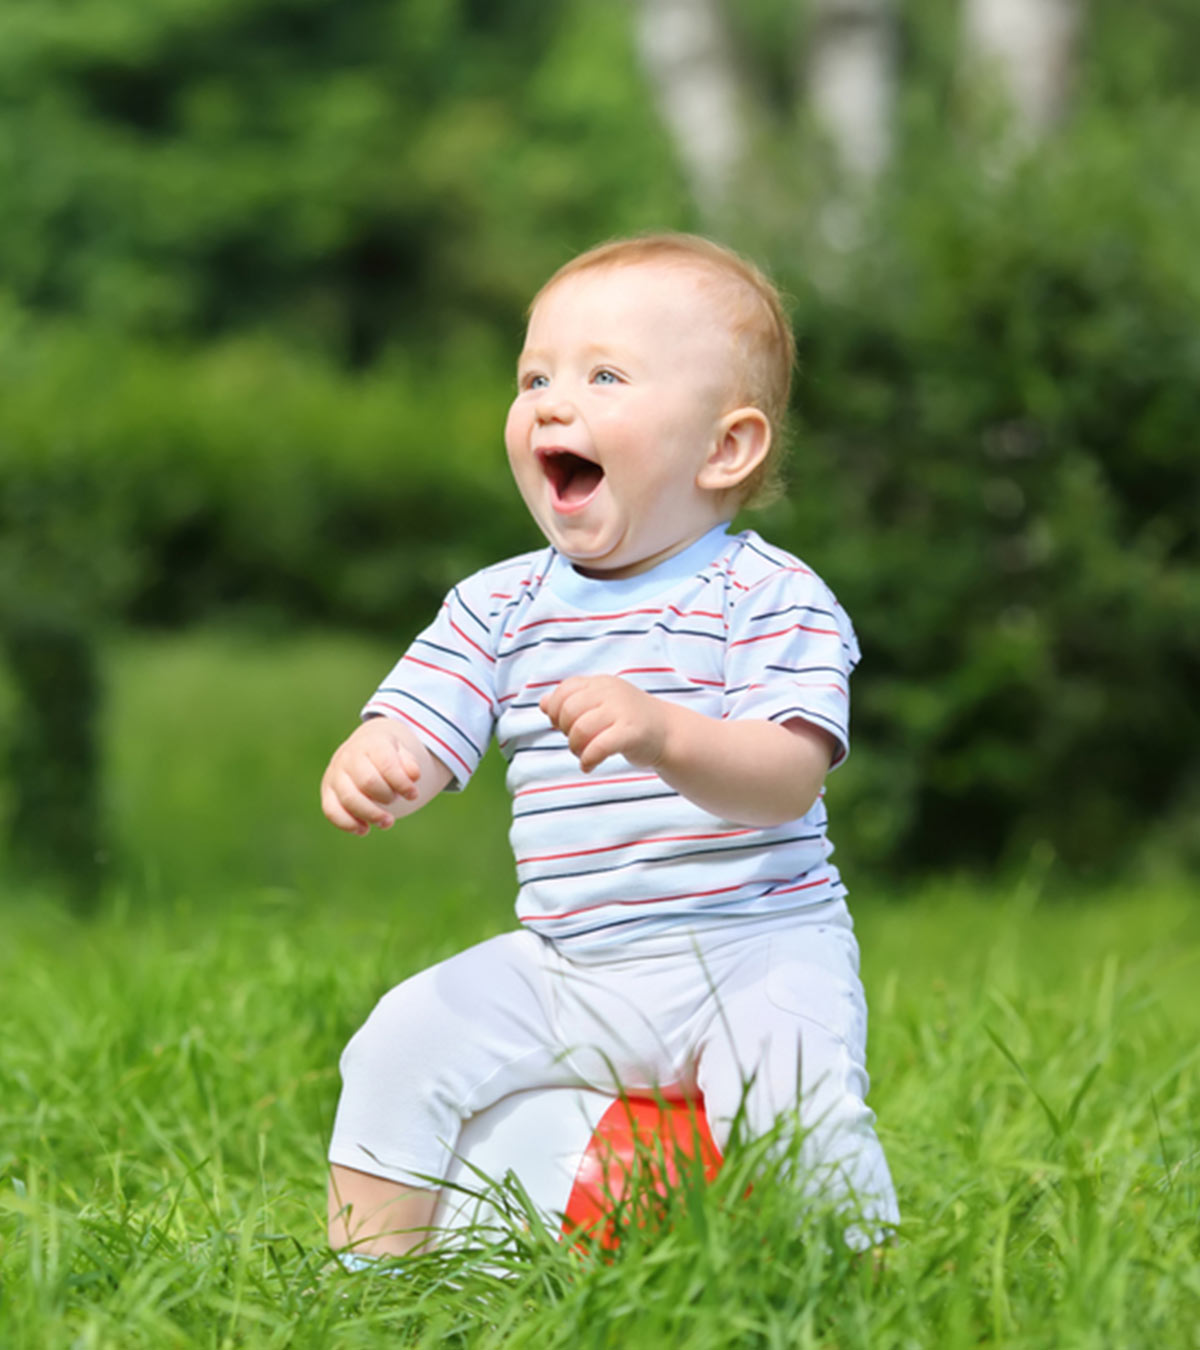 Baby Playing Outdoors With A Ball